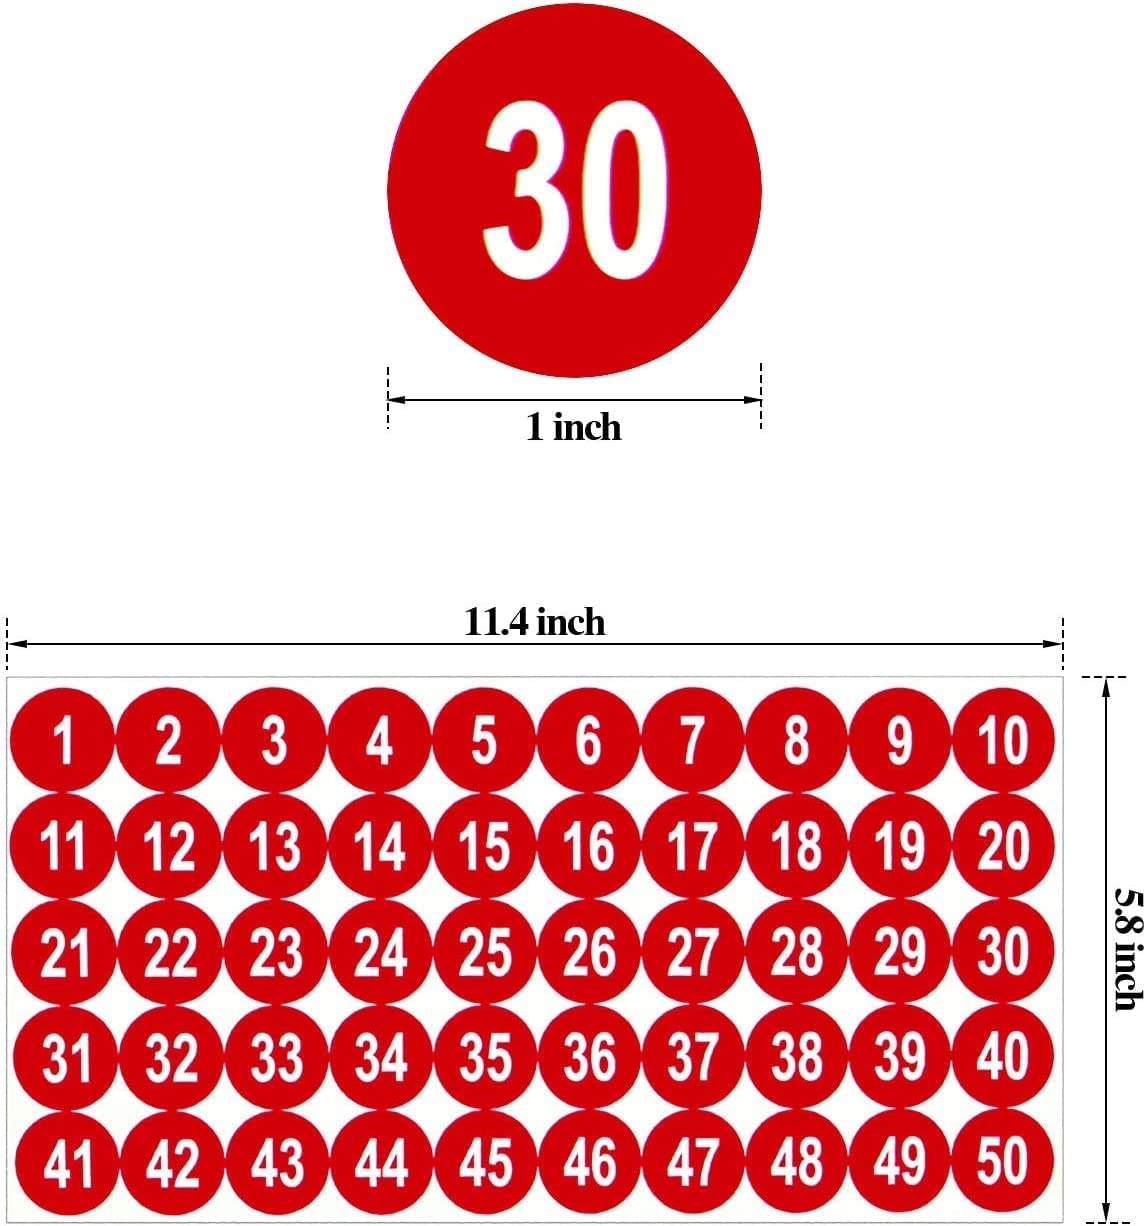 Round stickers with numbers from 1 to 50, in red color